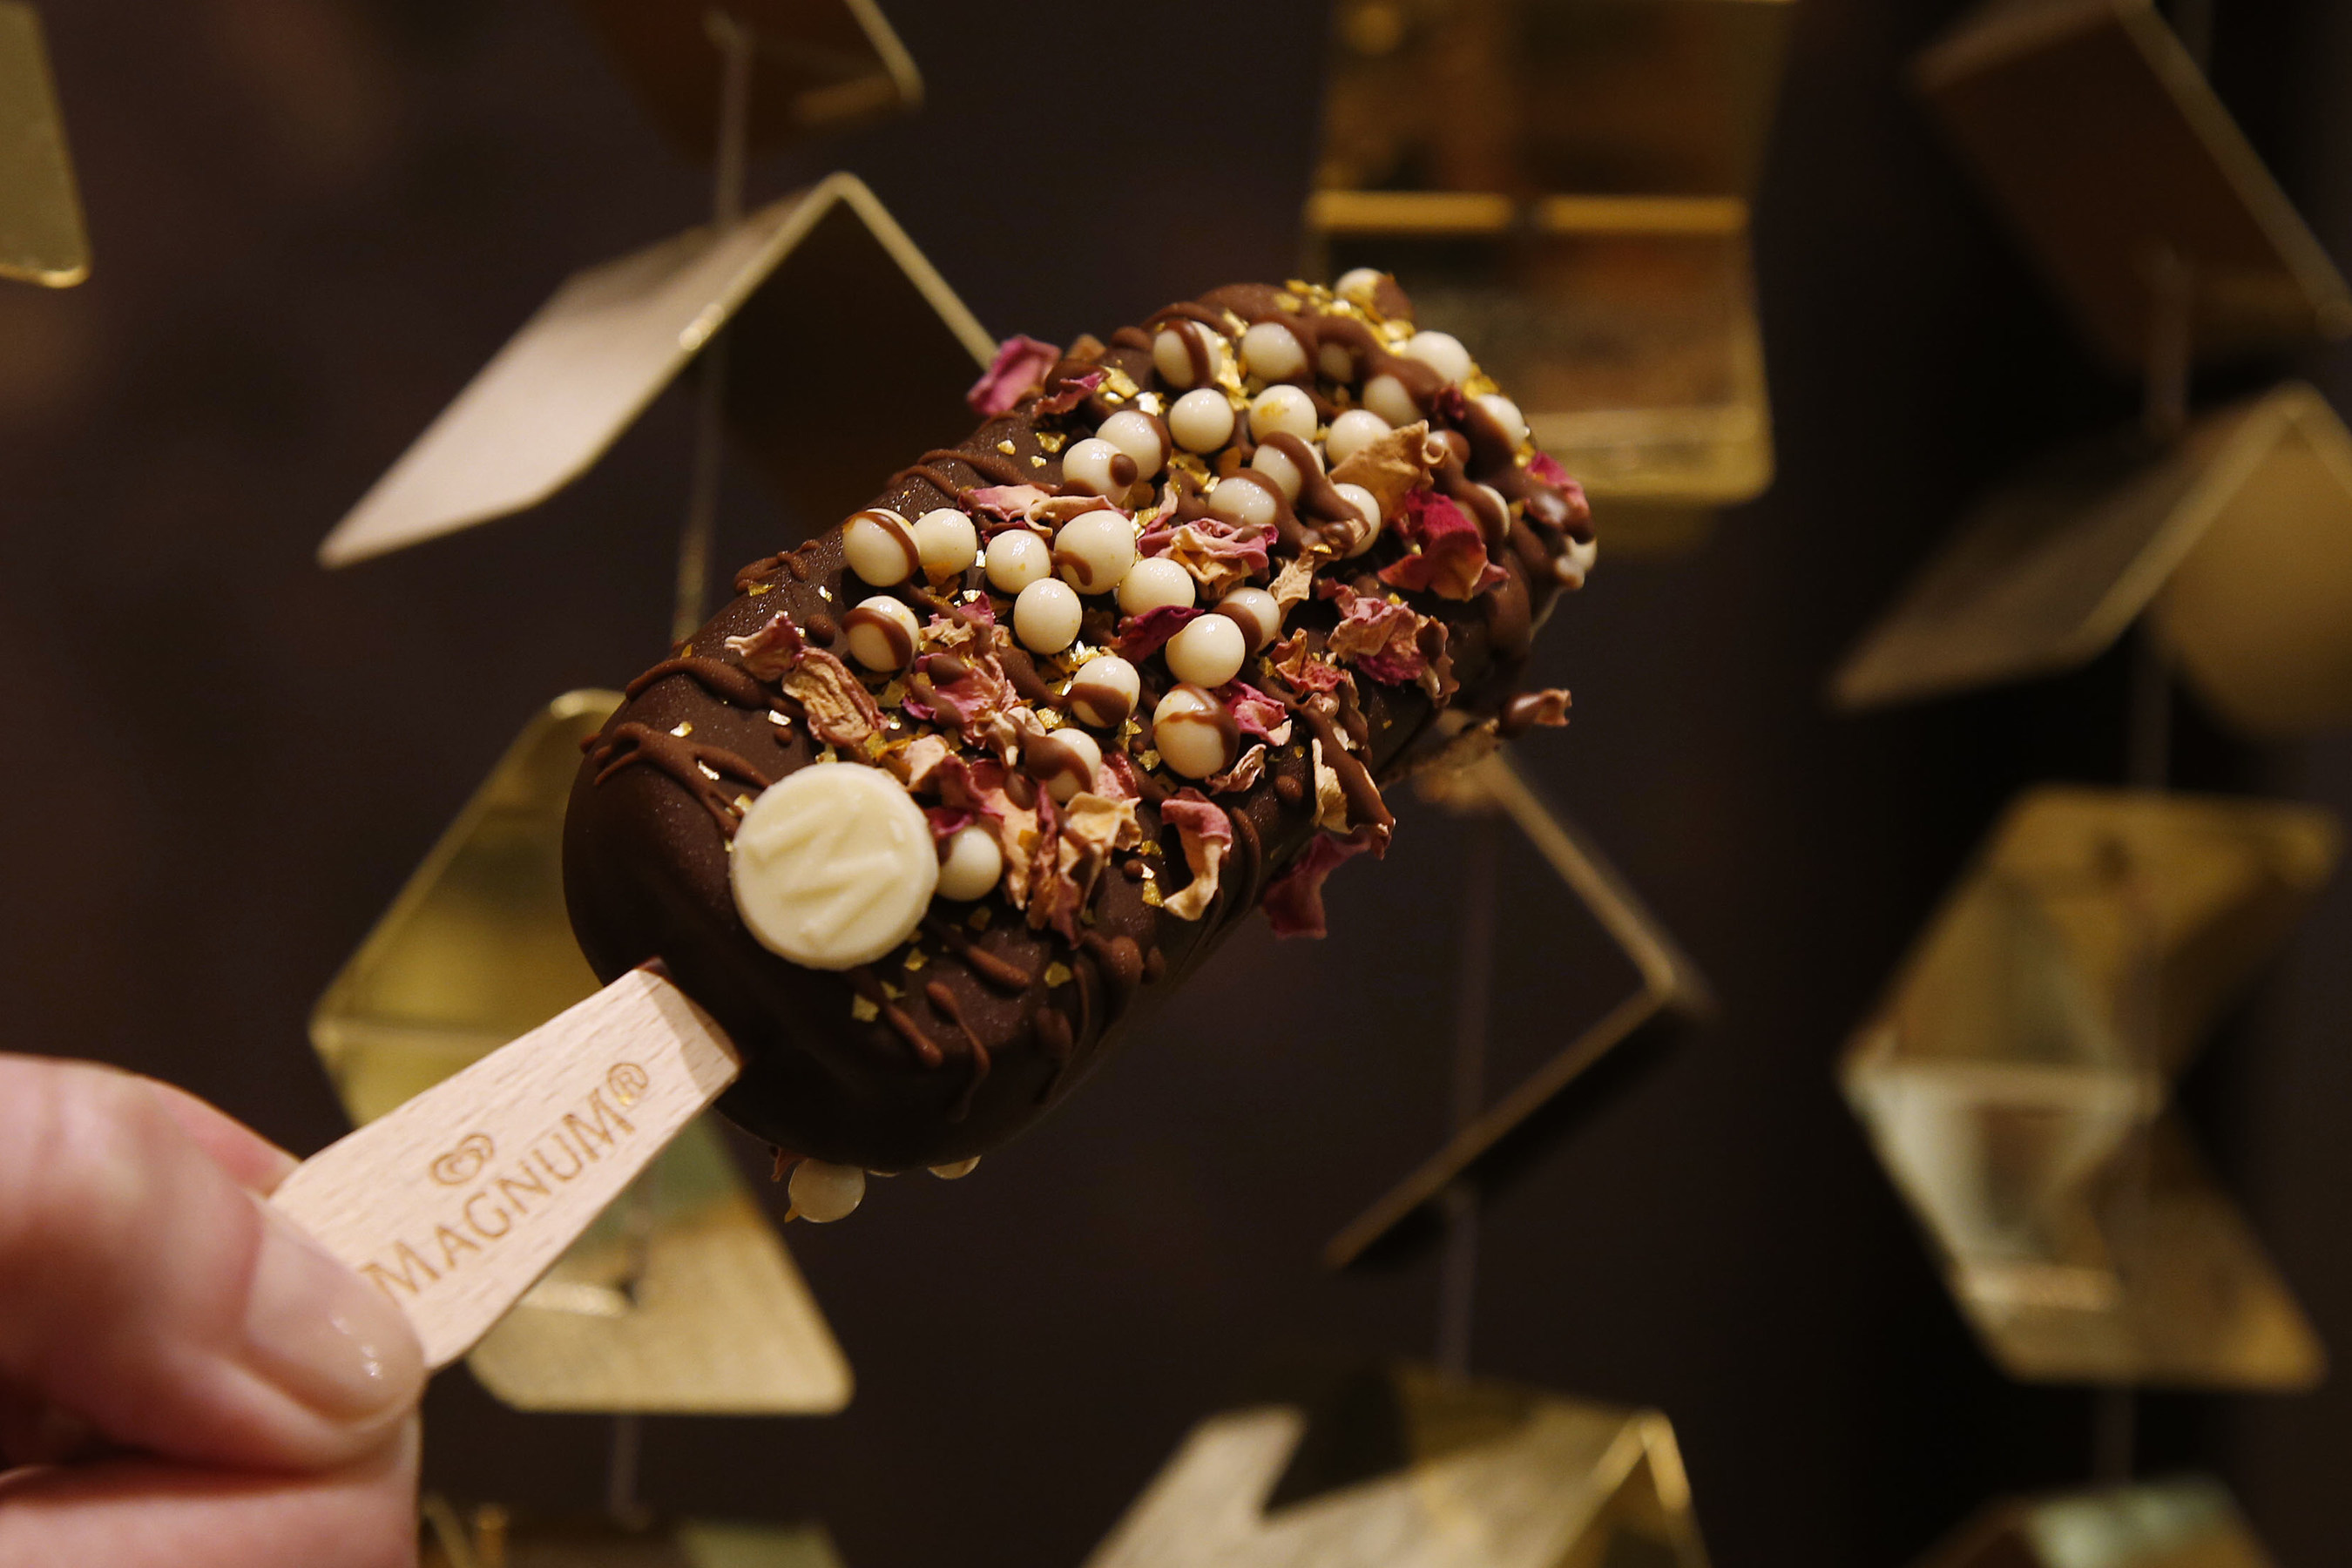 A close up of a custom MAGNUM ice cream bar at MAGNUM New York featuring vanilla bean ice cream hand-dipped in dark Belgian chocolate and topped with rose petals, gold flakes and white chocolate crispearls. This is the first U.S. storefront for MAGNUM Ice Cream; for more information, visit Facebook.com/MAGNUM. (Photo by Jason DeCrow for MAGNUM)